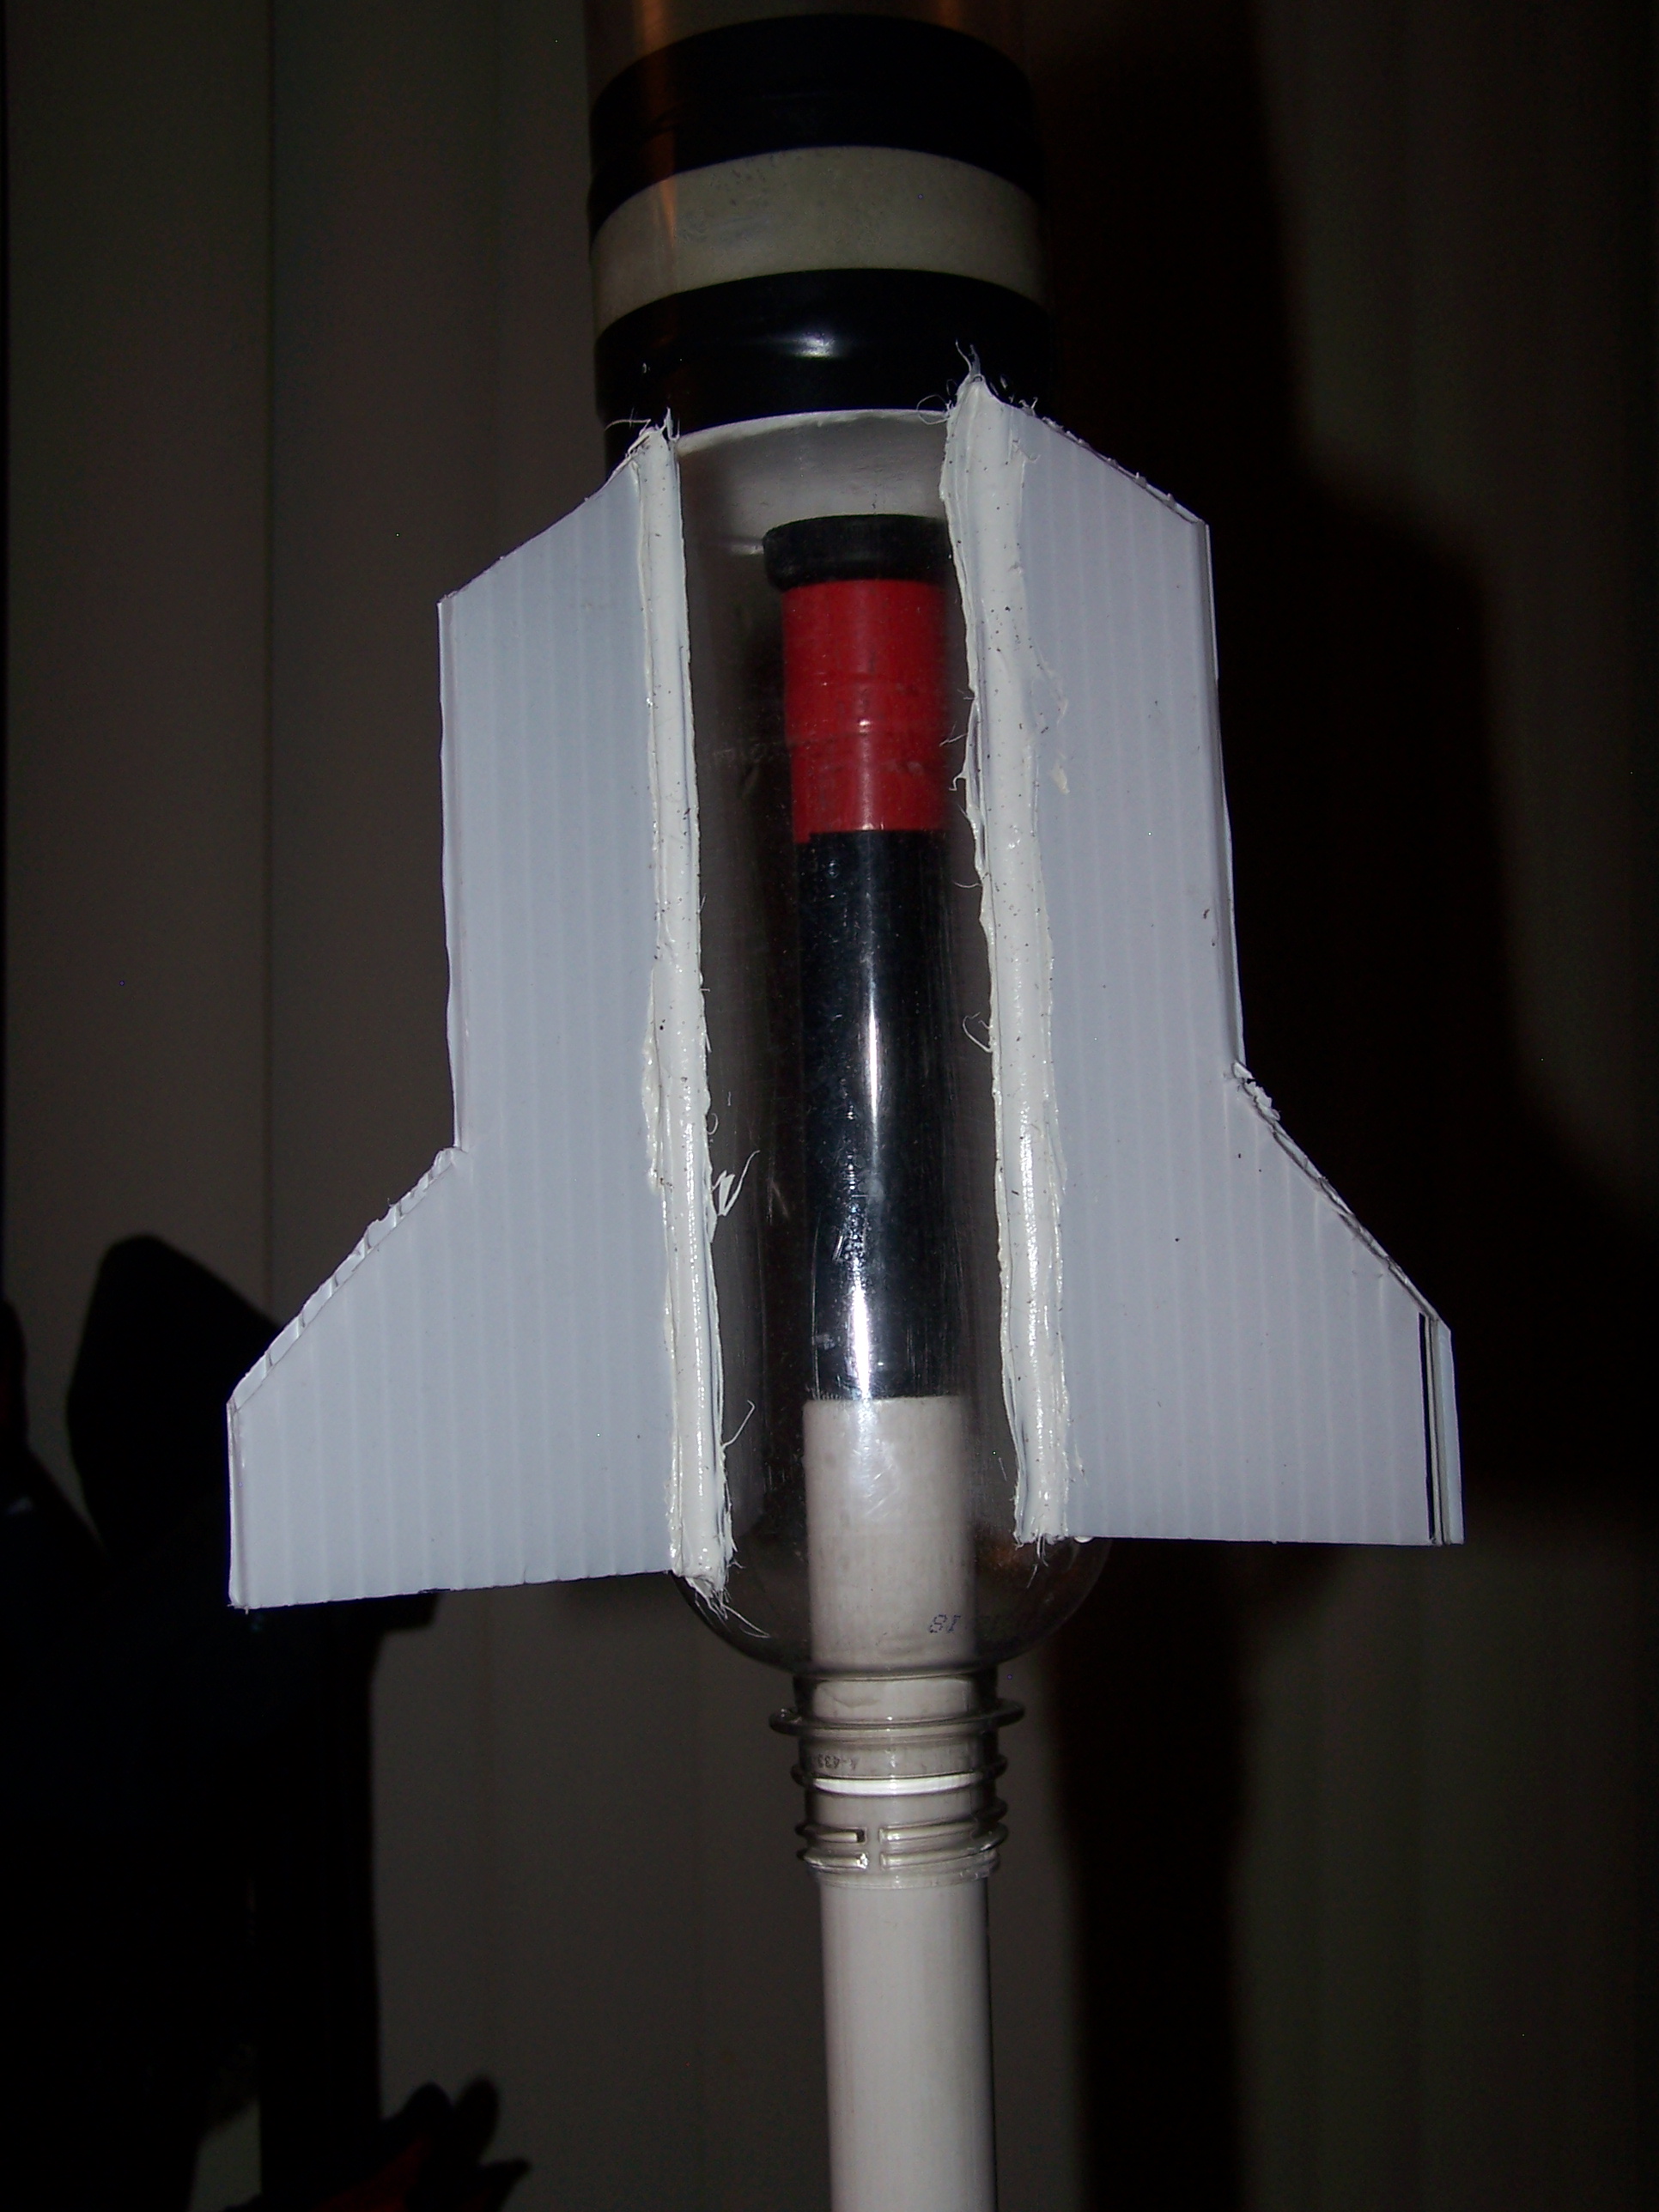 &quot;Thrust Capacitor&quot; atop fill tube of Launch Cube. Rocket not fully seated to allow a window view inside.